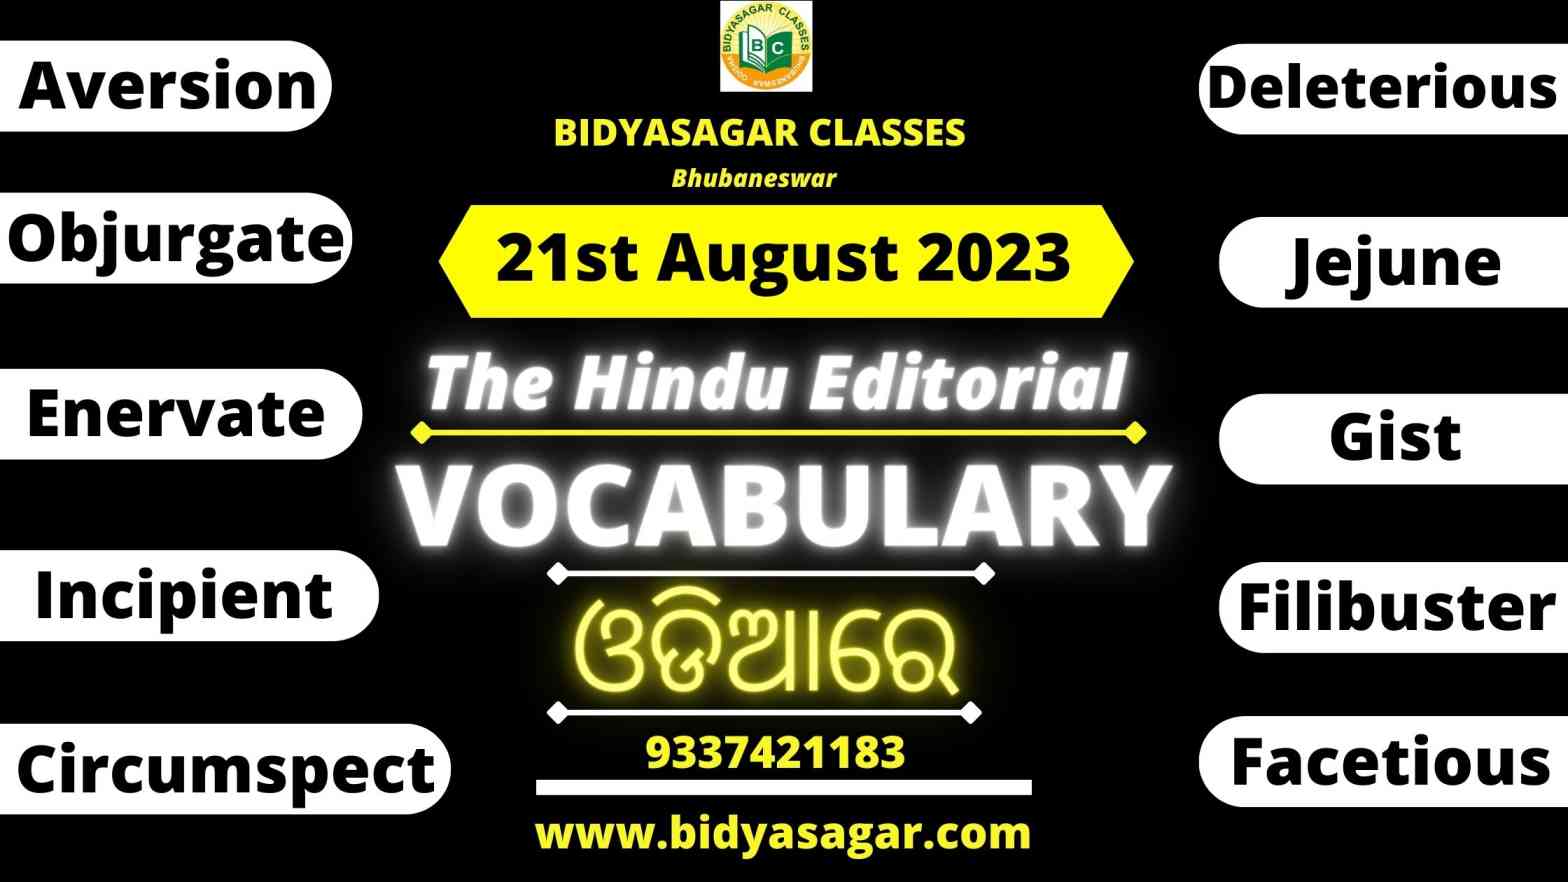 The Hindu Editorial Vocabulary of 21st August 2023